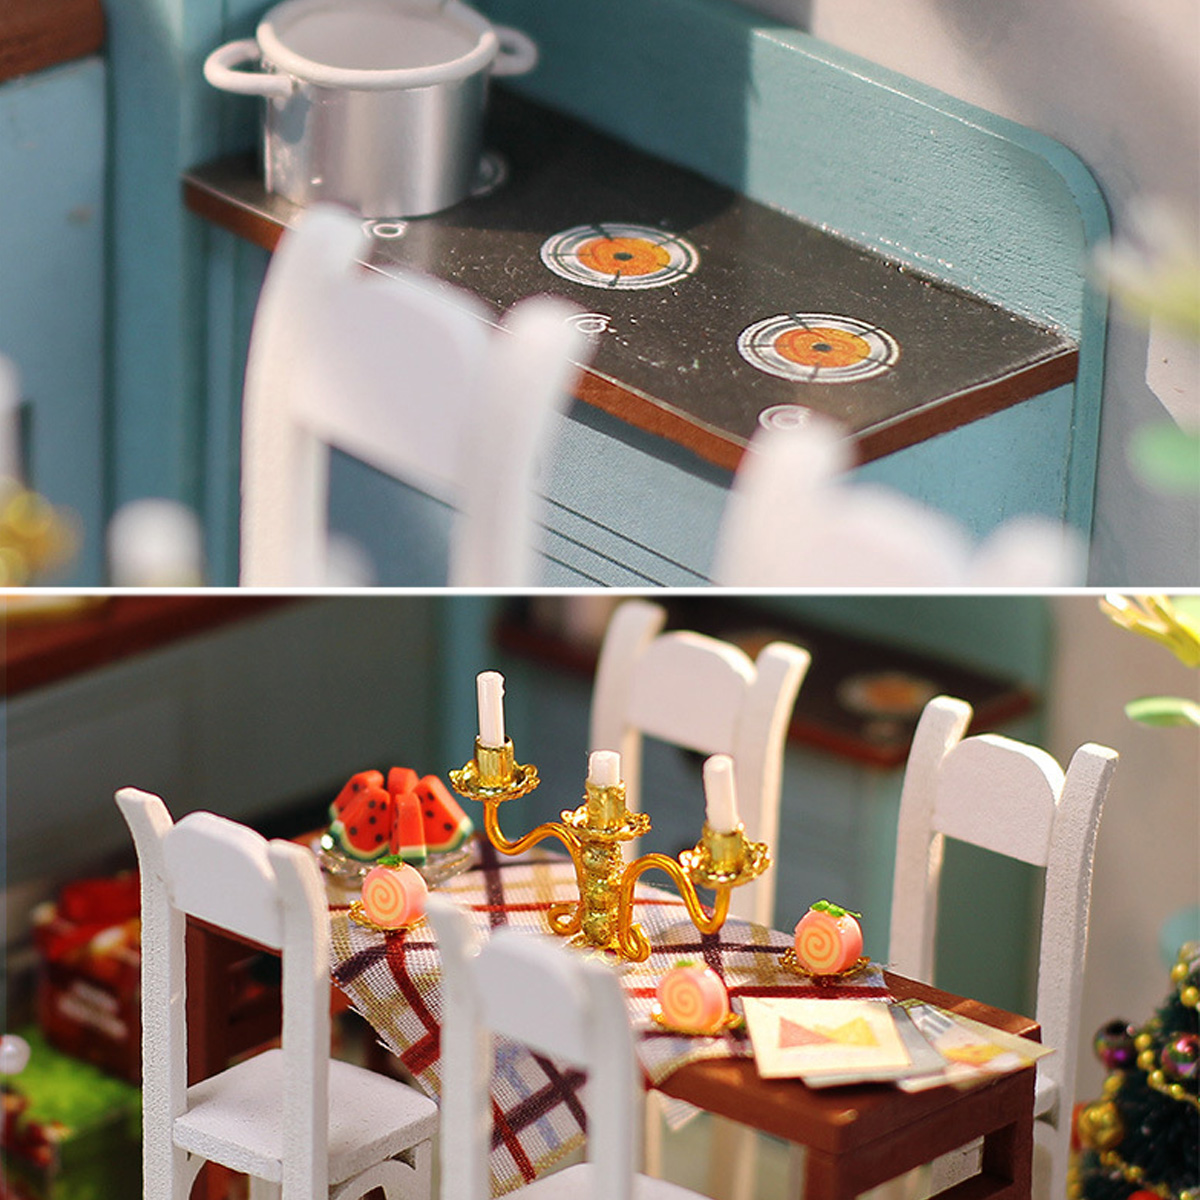 Wooden-Dining-Room-DIY-Handmade-Assemble-Doll-House-Miniature-Furniture-Kit-Education-Toy-with-LED-L-1737848-9